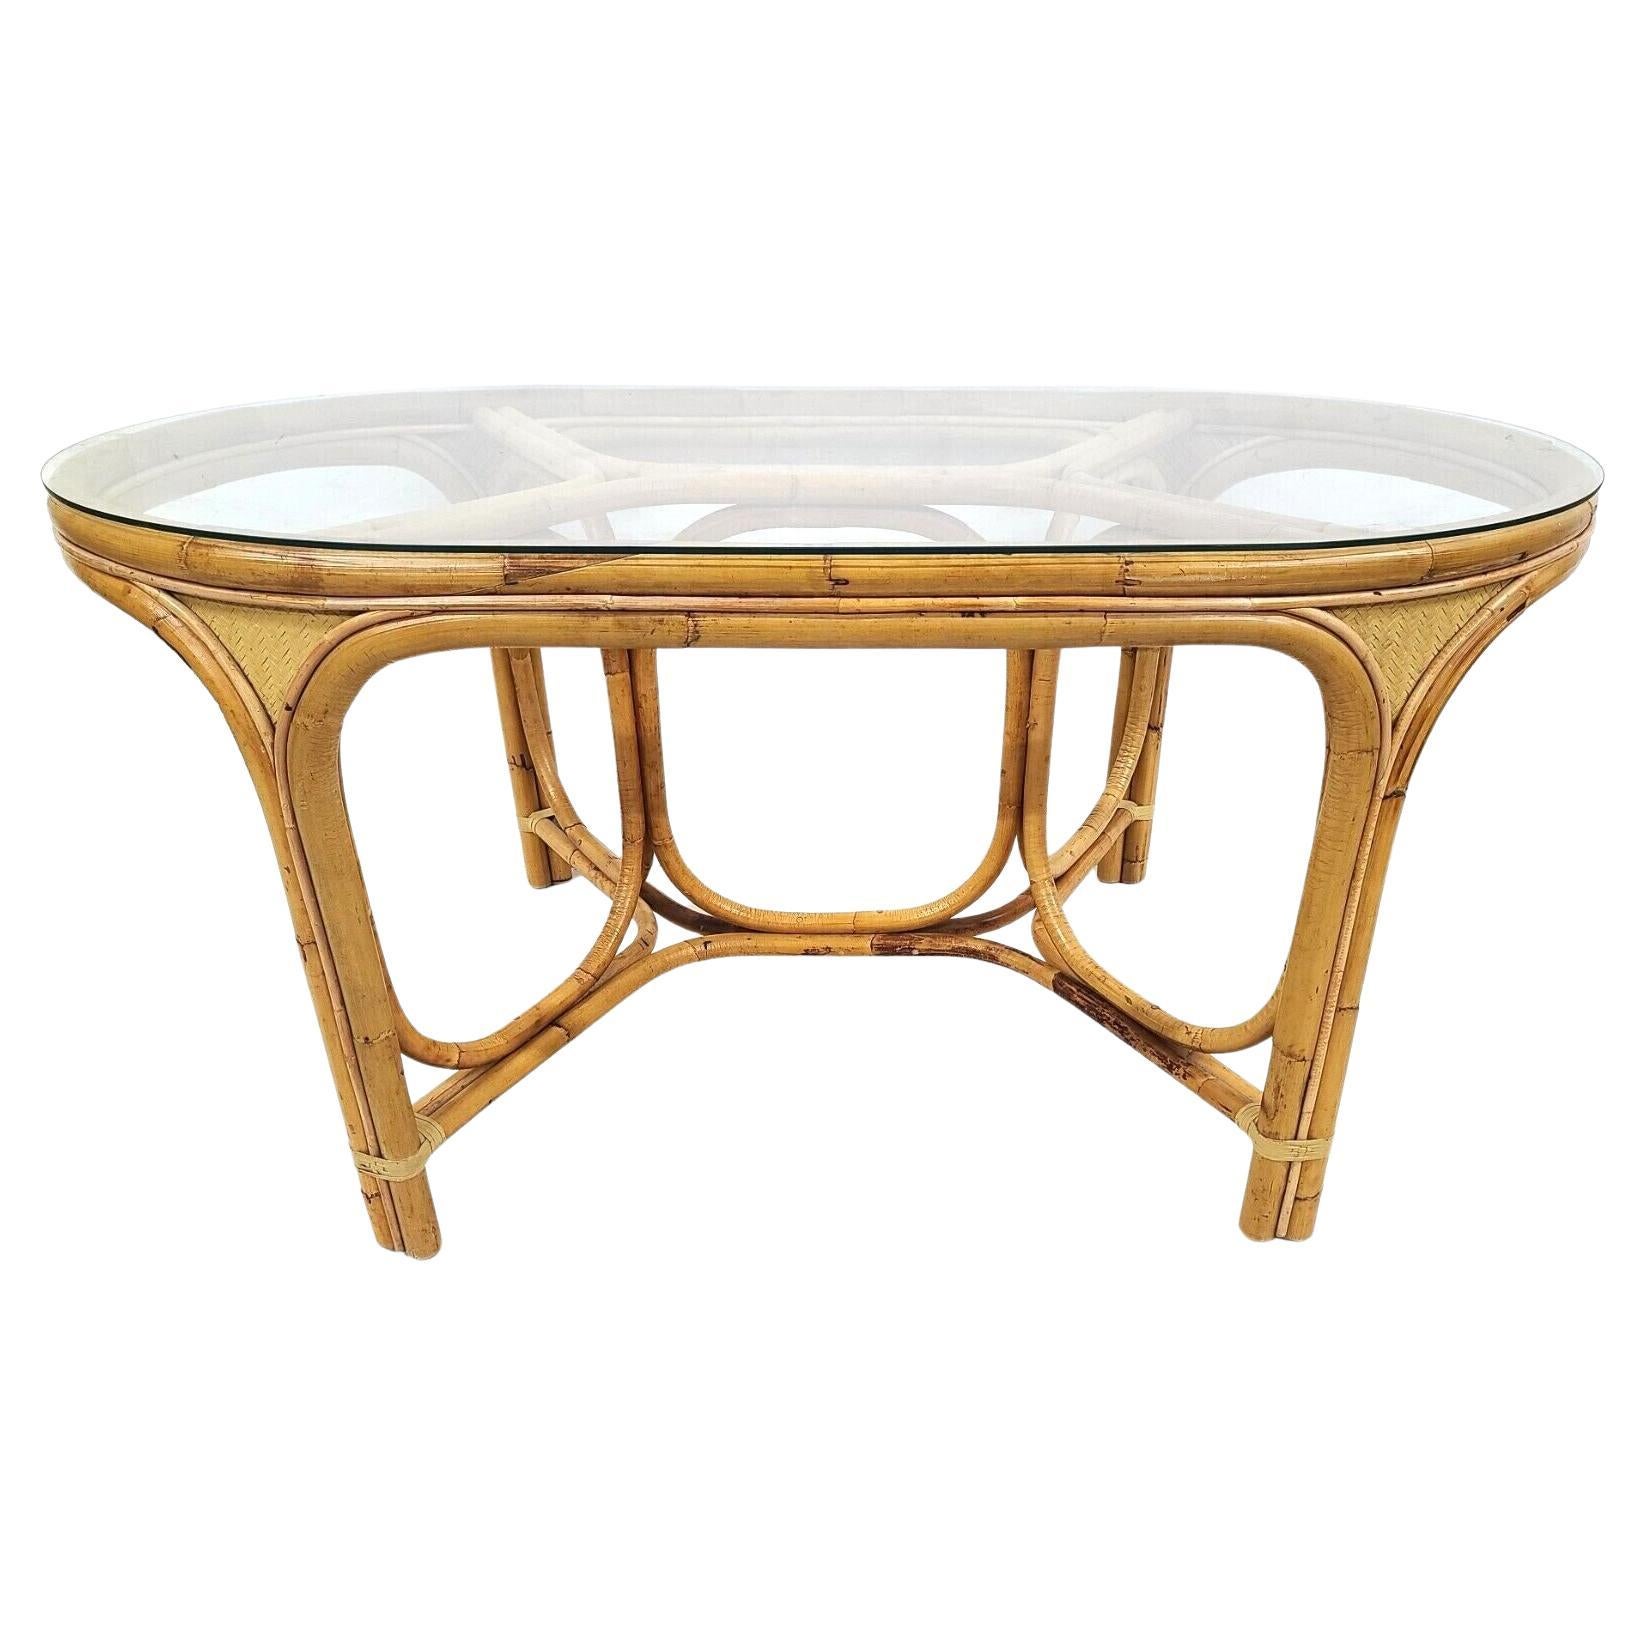 Vintage 1970s Bamboo Rattan Glass Oval Dining Table